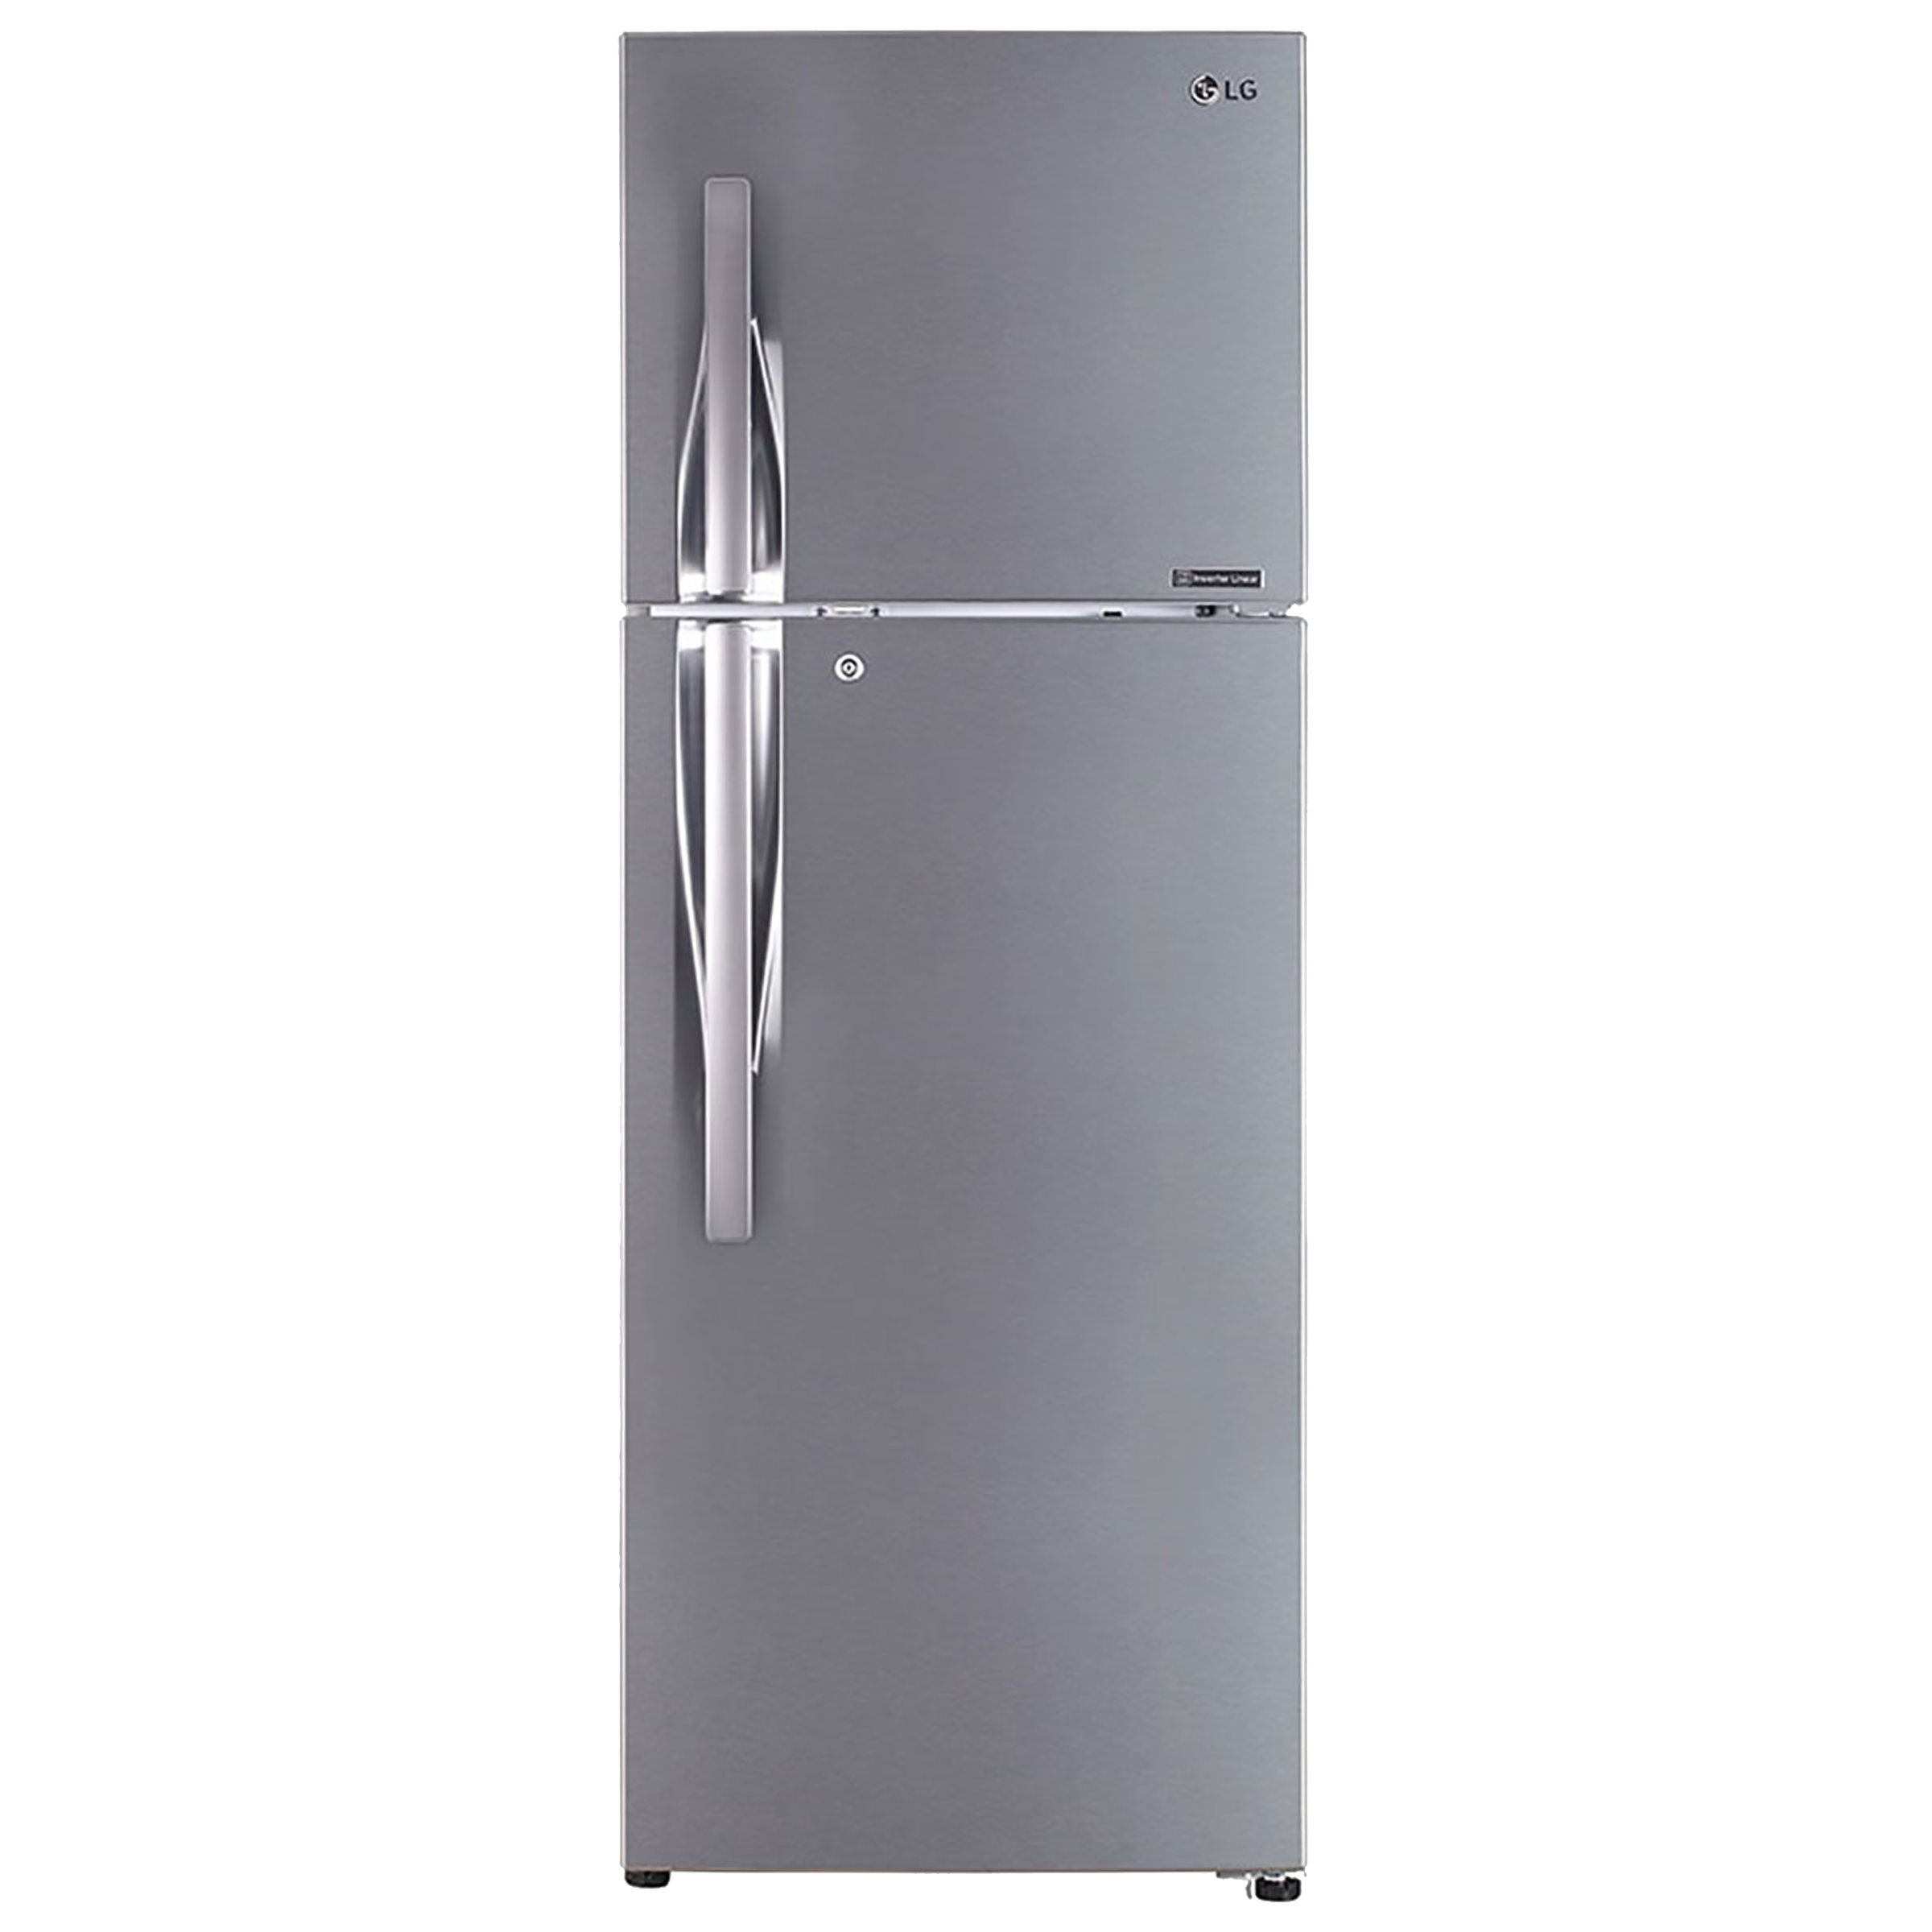 LG 335 Litres 3 Star Frost Free Inverter Double Door Refrigerator (Convertible Plus, GL-T372JPZN.EPZZEBN, Shiny Steel)_1